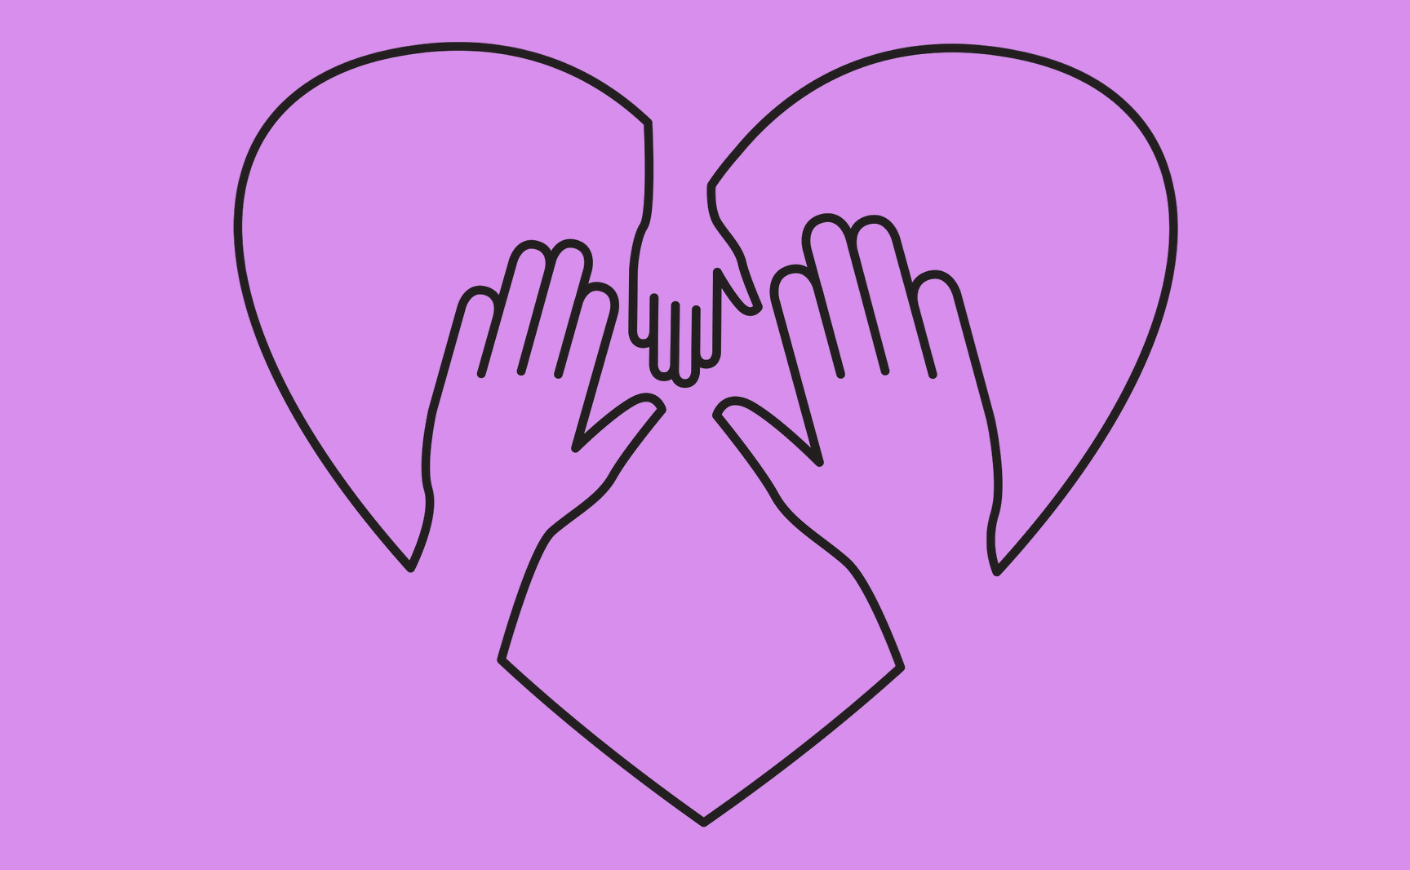 large and small hands inside a heart on a purple background